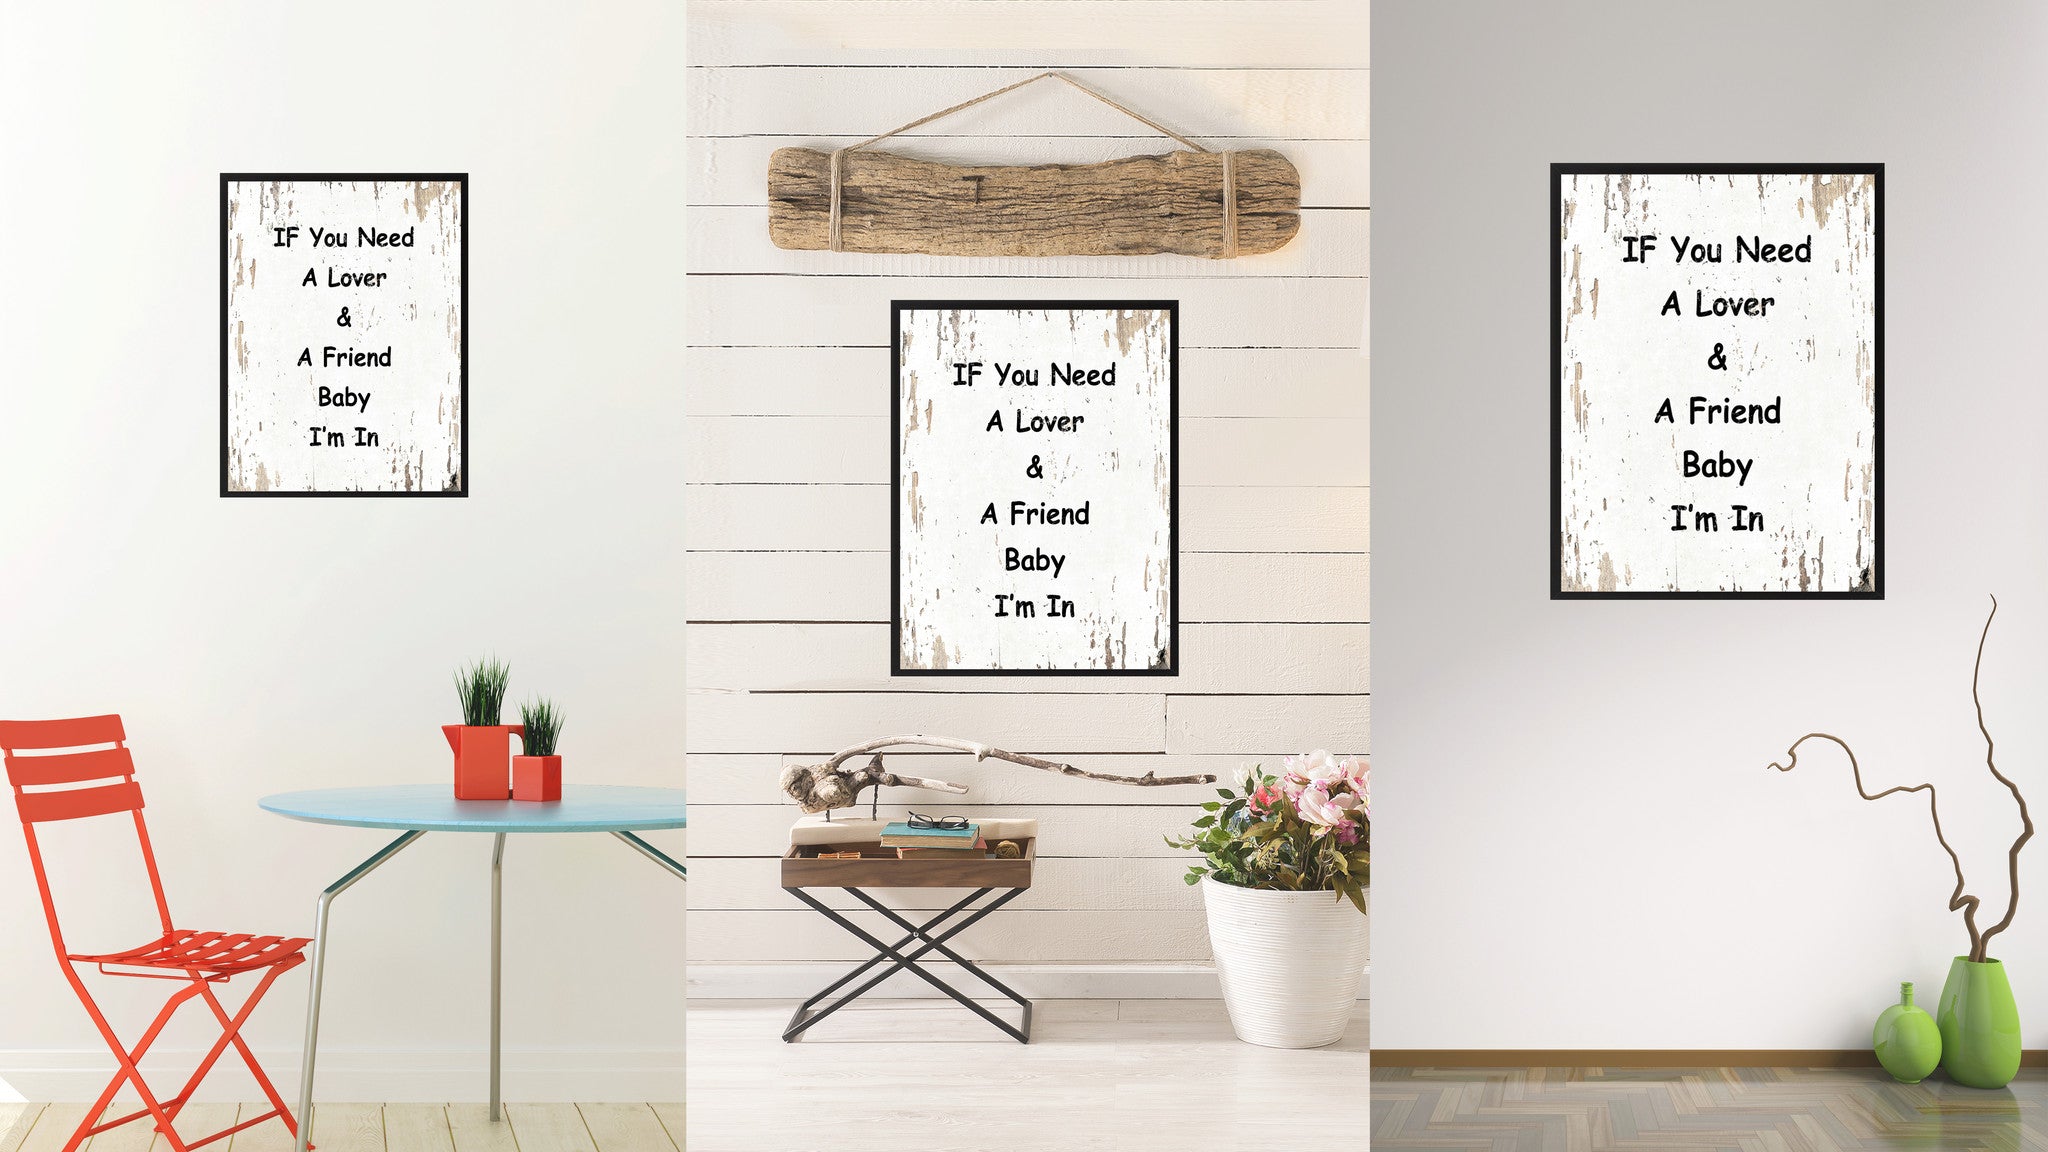 If you need a lover & a friend baby I'm in Happy Quote Saying Gift Ideas Home Decor Wall Art